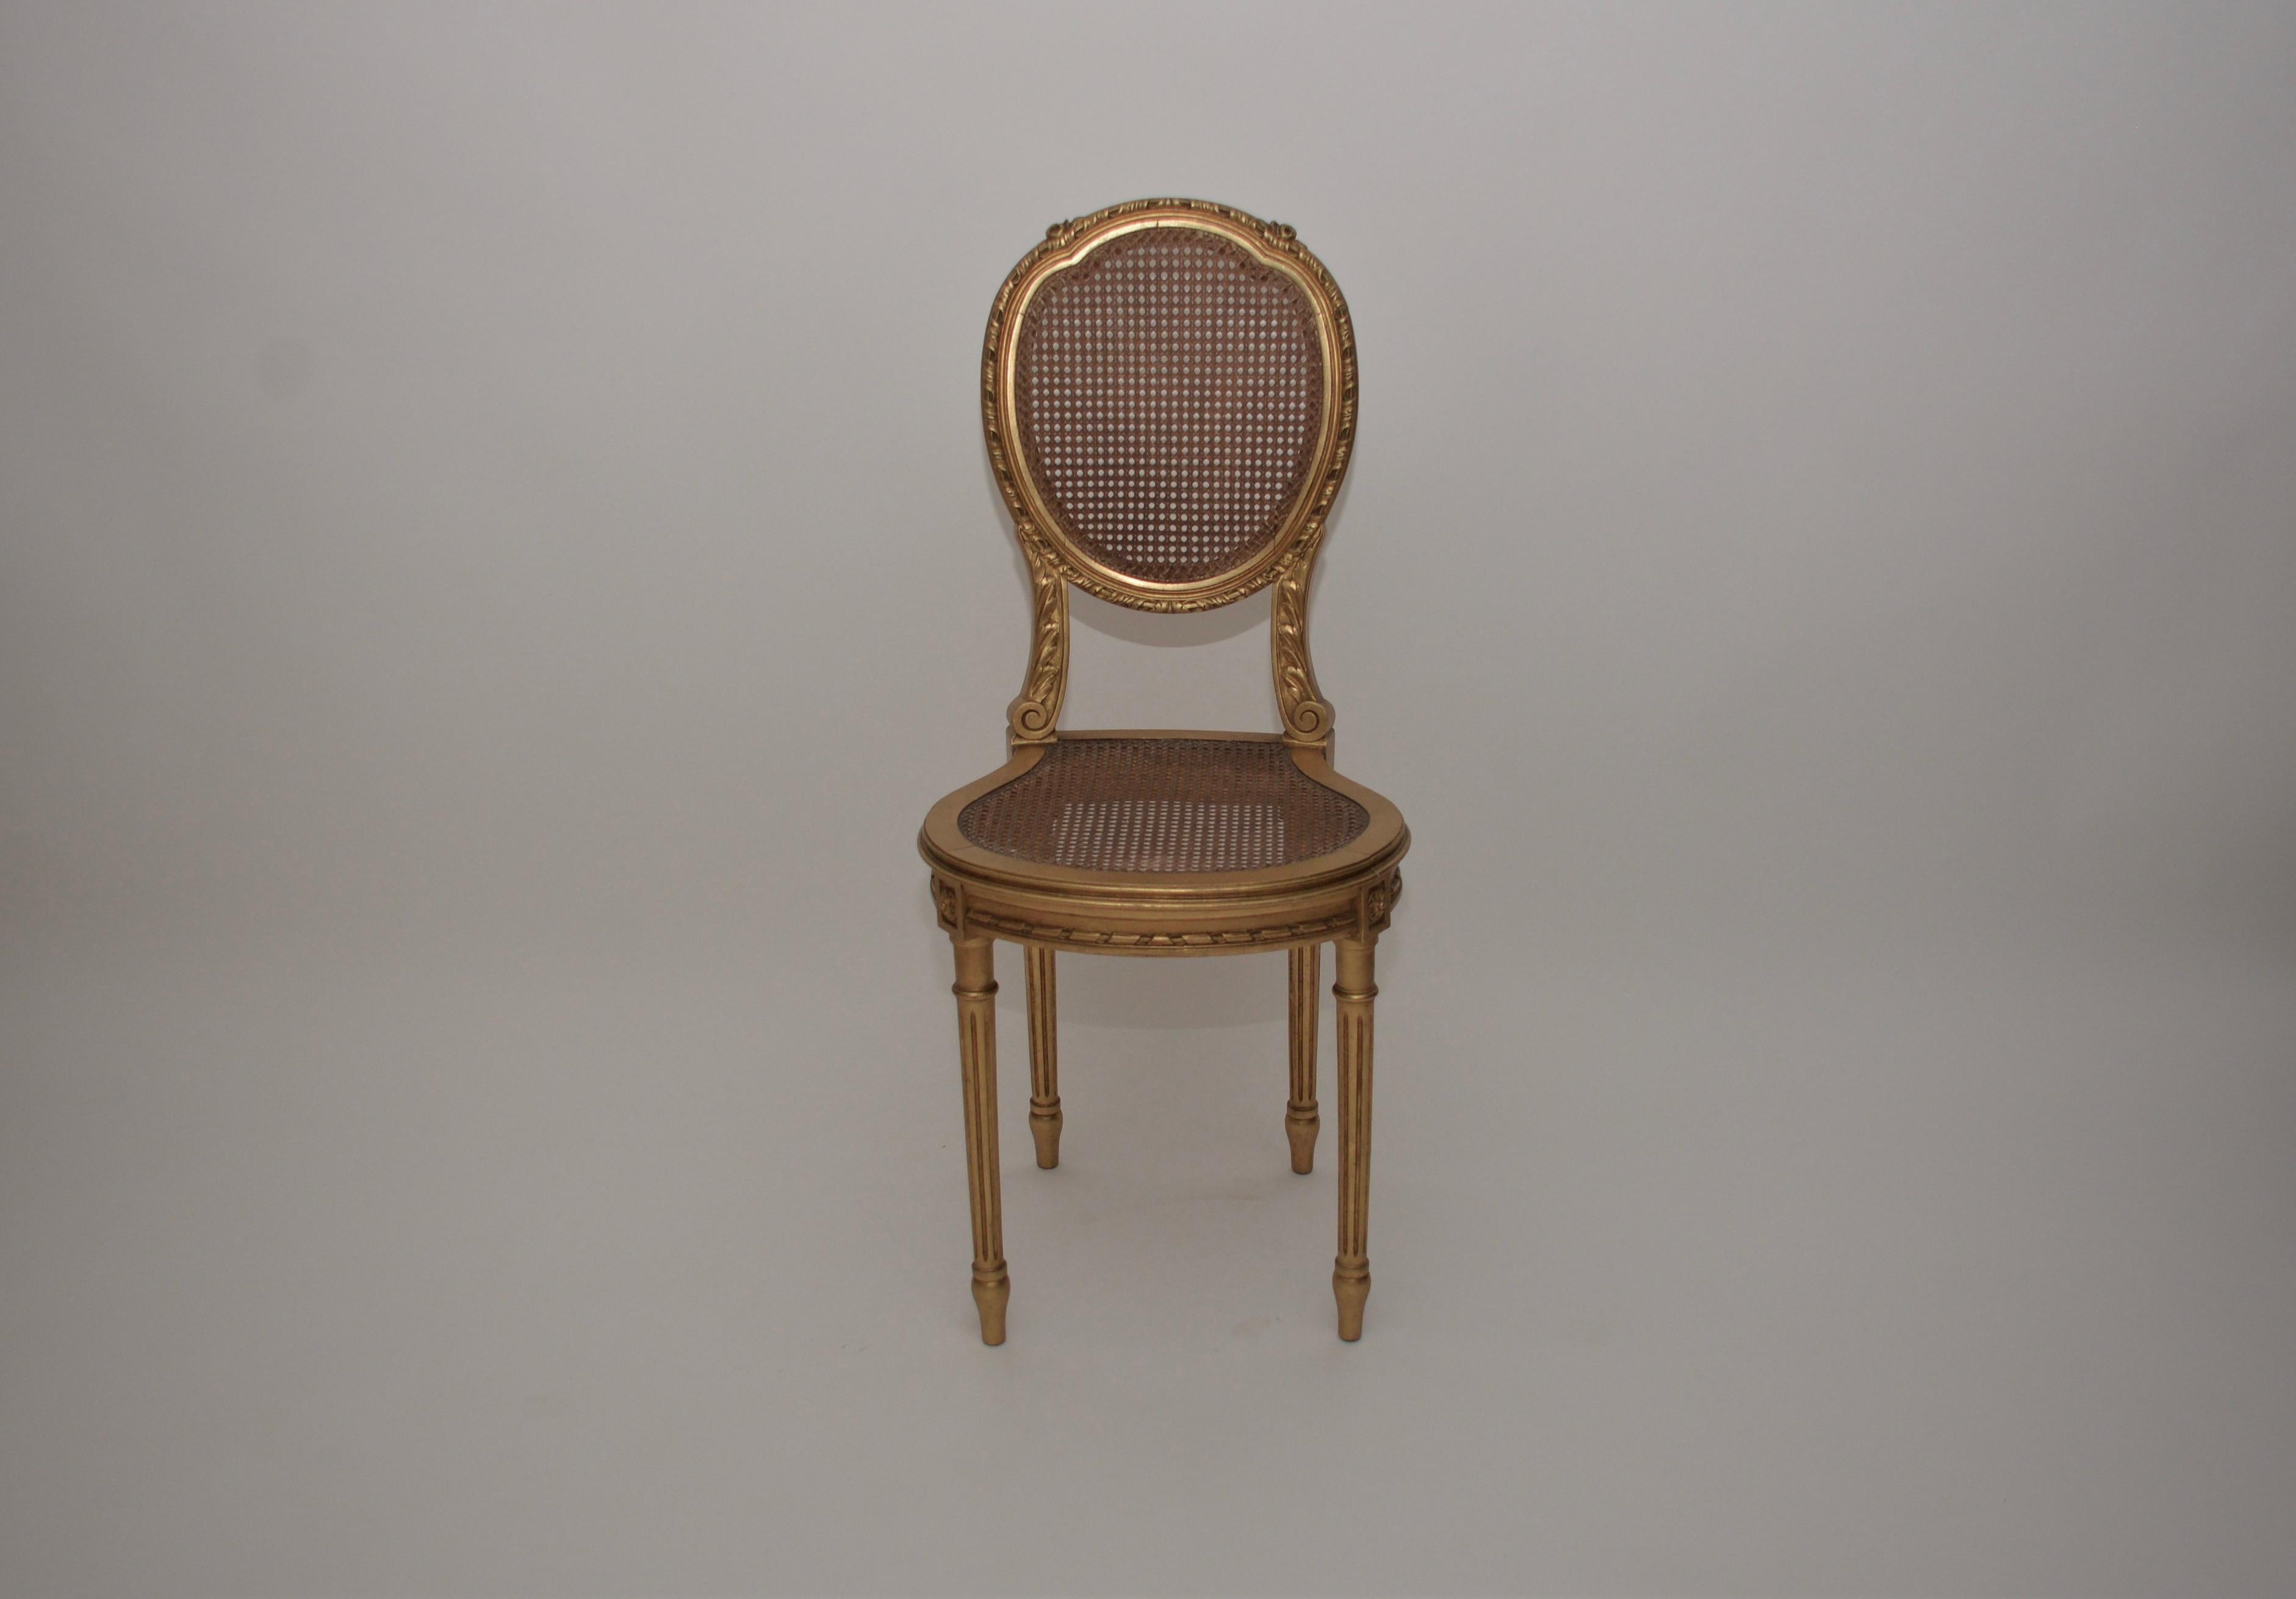 A fabulous French vintage gold gilt rattan chair in the Hollywood Regency style. This chair has lovely intricate detail within the wood work which compliments the rattan seat and back. The seat height is 48cm.